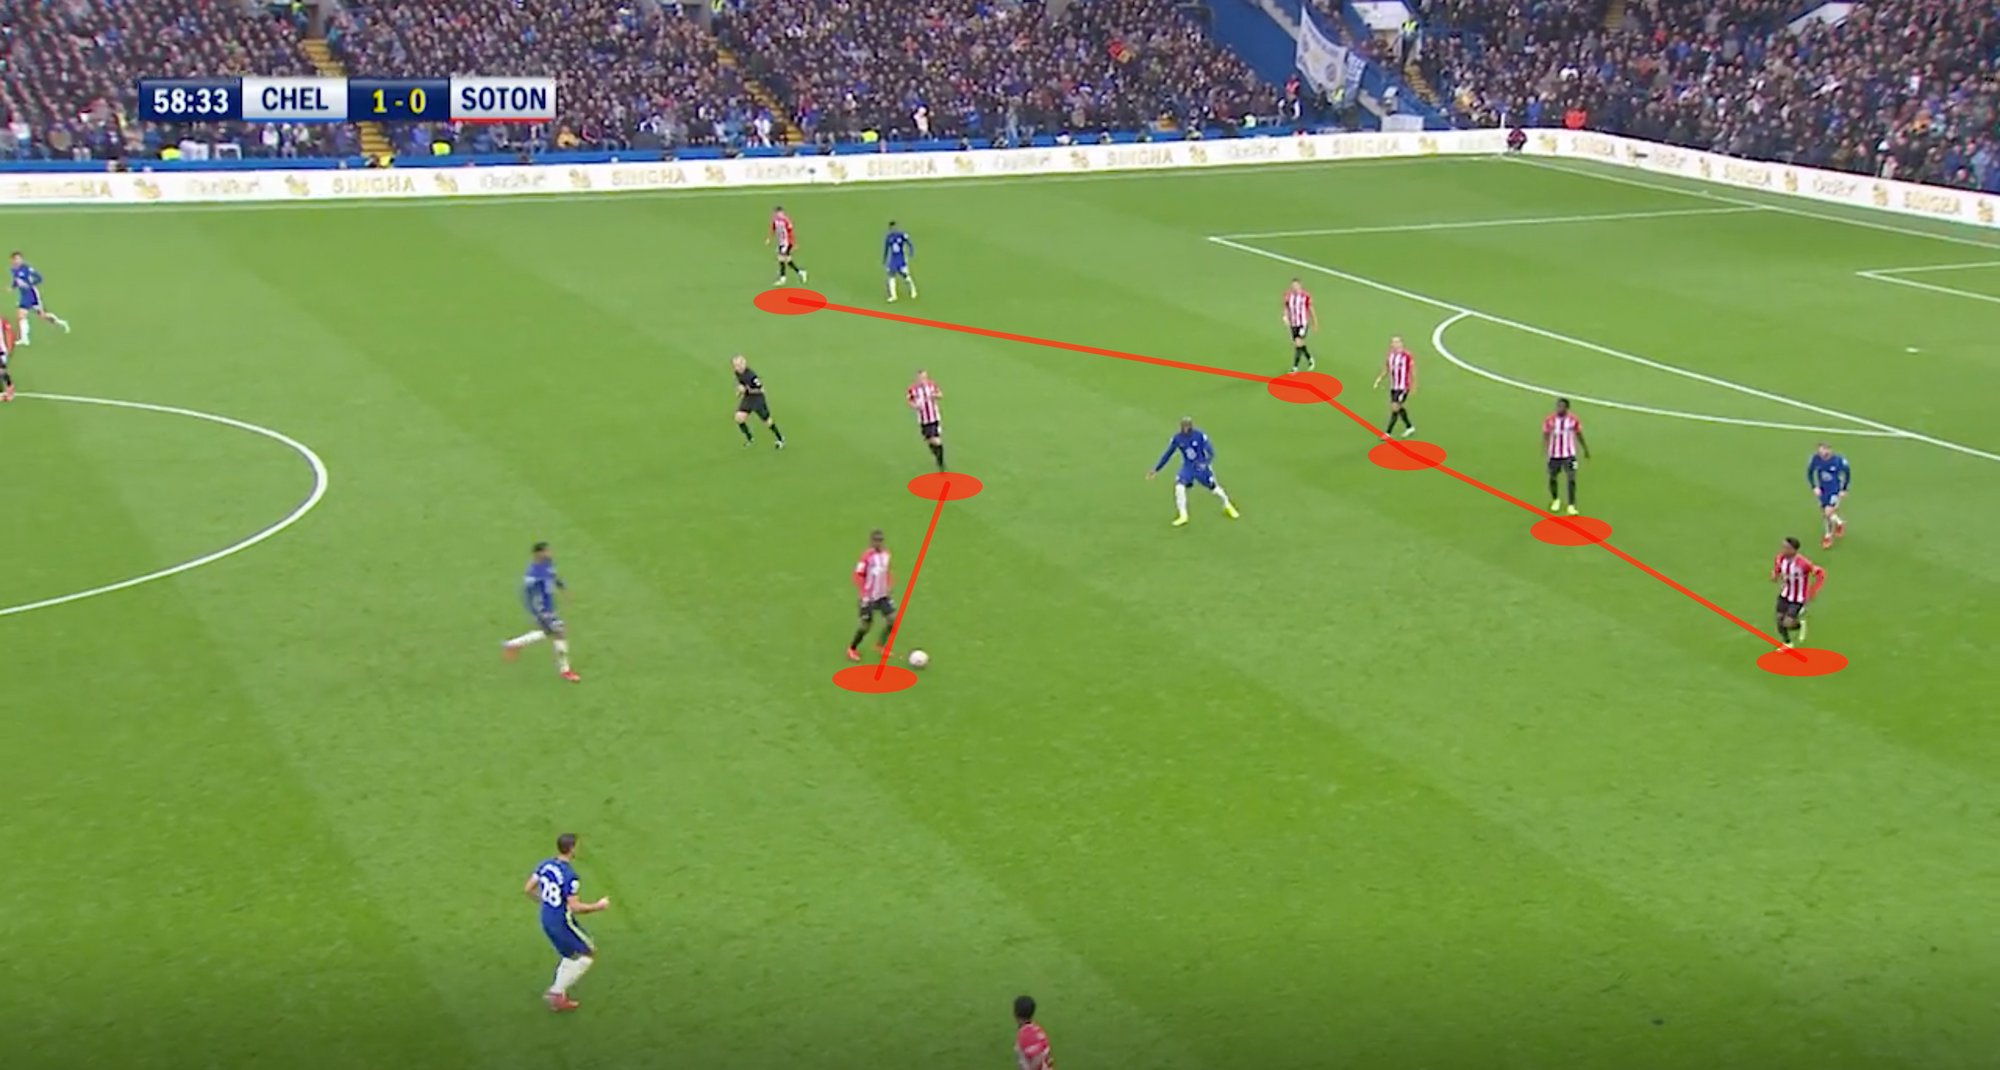 Chelsea see off Southampton in a late home win - Tactical Analysis